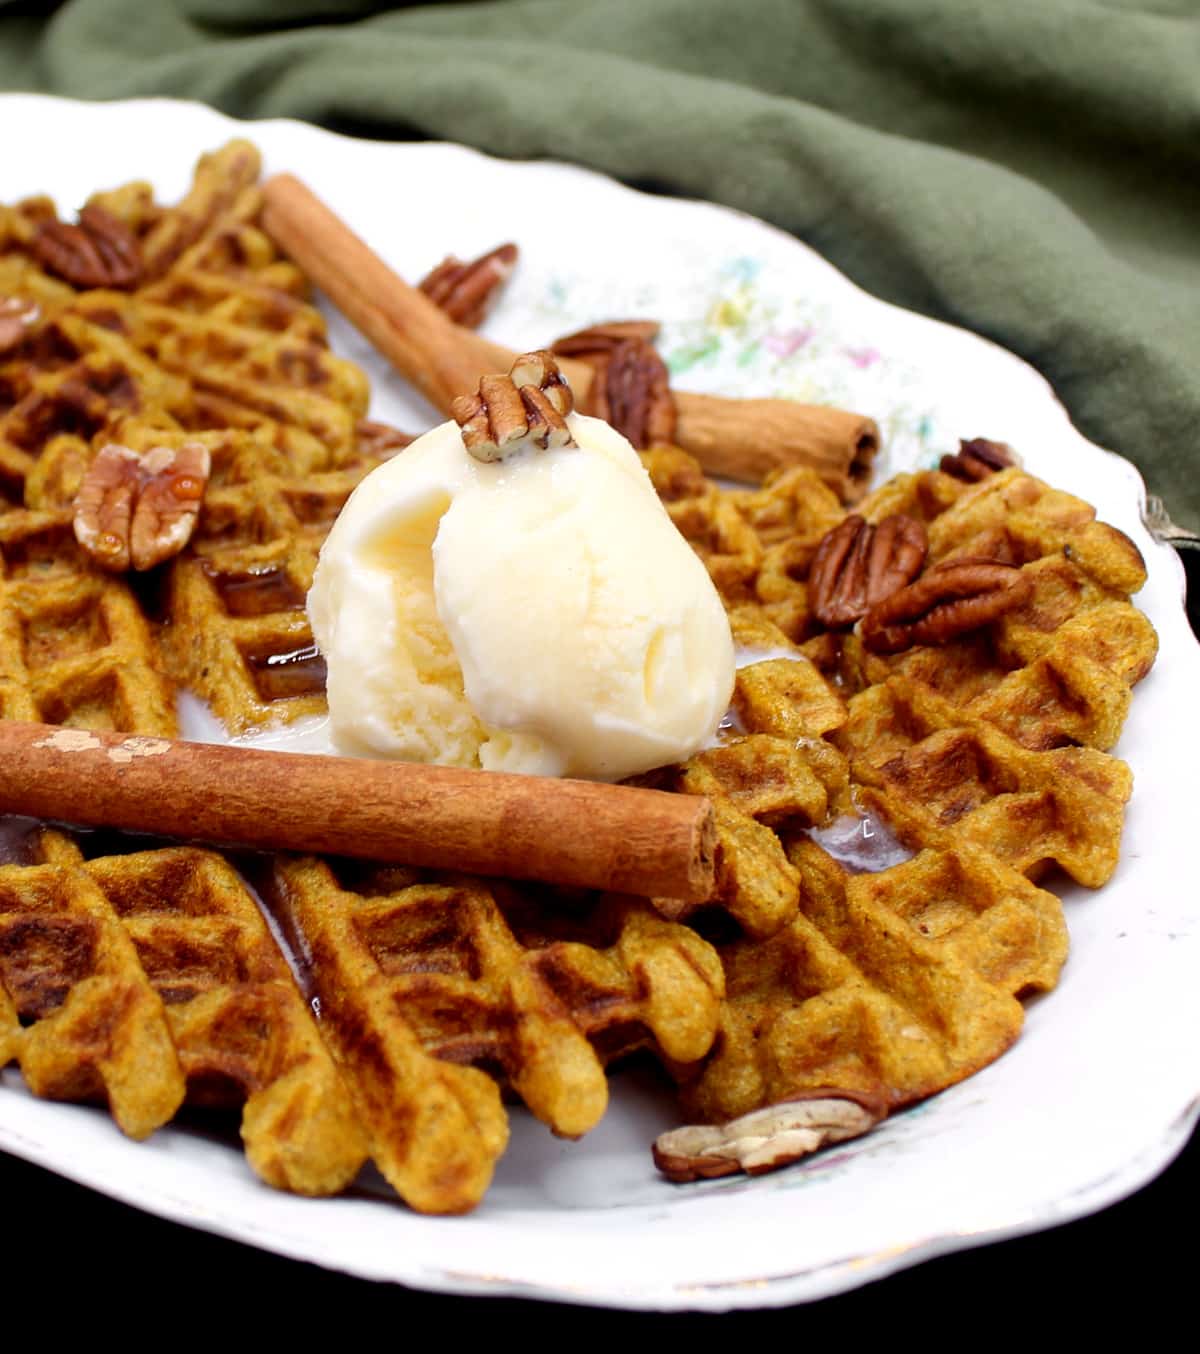 Vegan Sourdough Pumpkin Spice Waffles on a white oval decorative serving dish with a flower pattern. On top of the waffles is vanilla ice cream and sticks of cinnamon and pecans are scattered around.